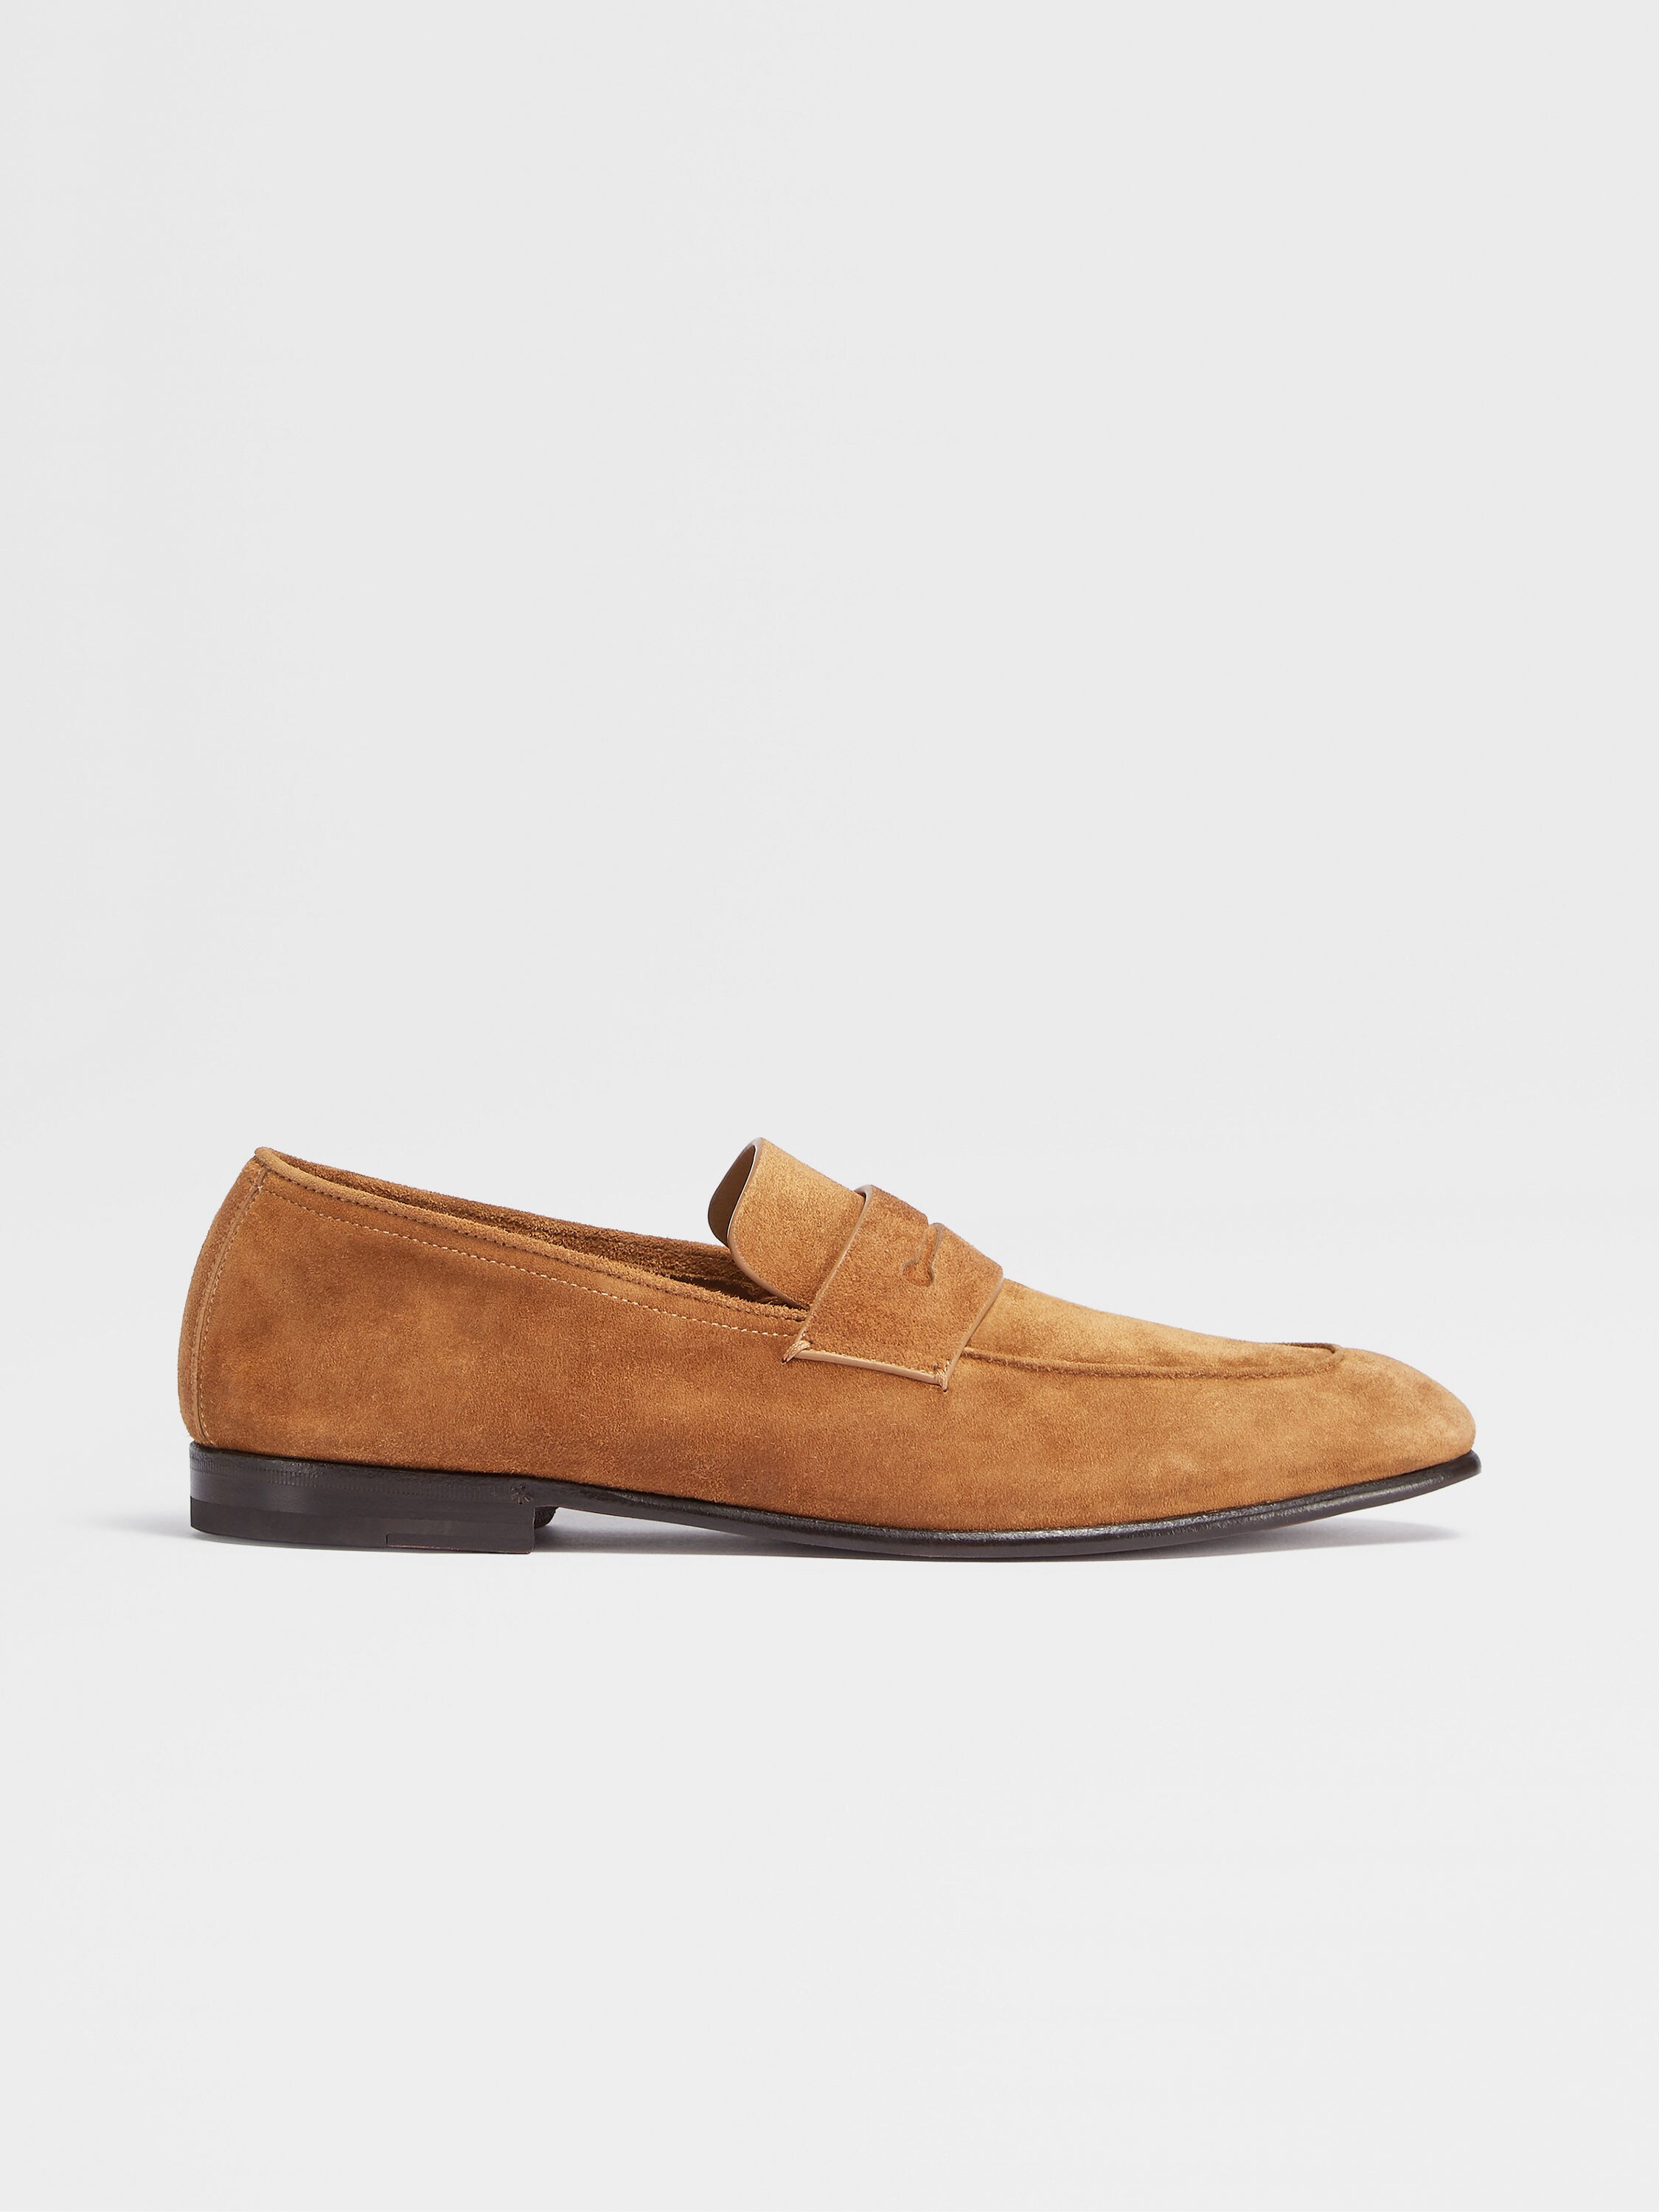 Ochre Suede L'Asola Loafers FW23 22068481 | Zegna US